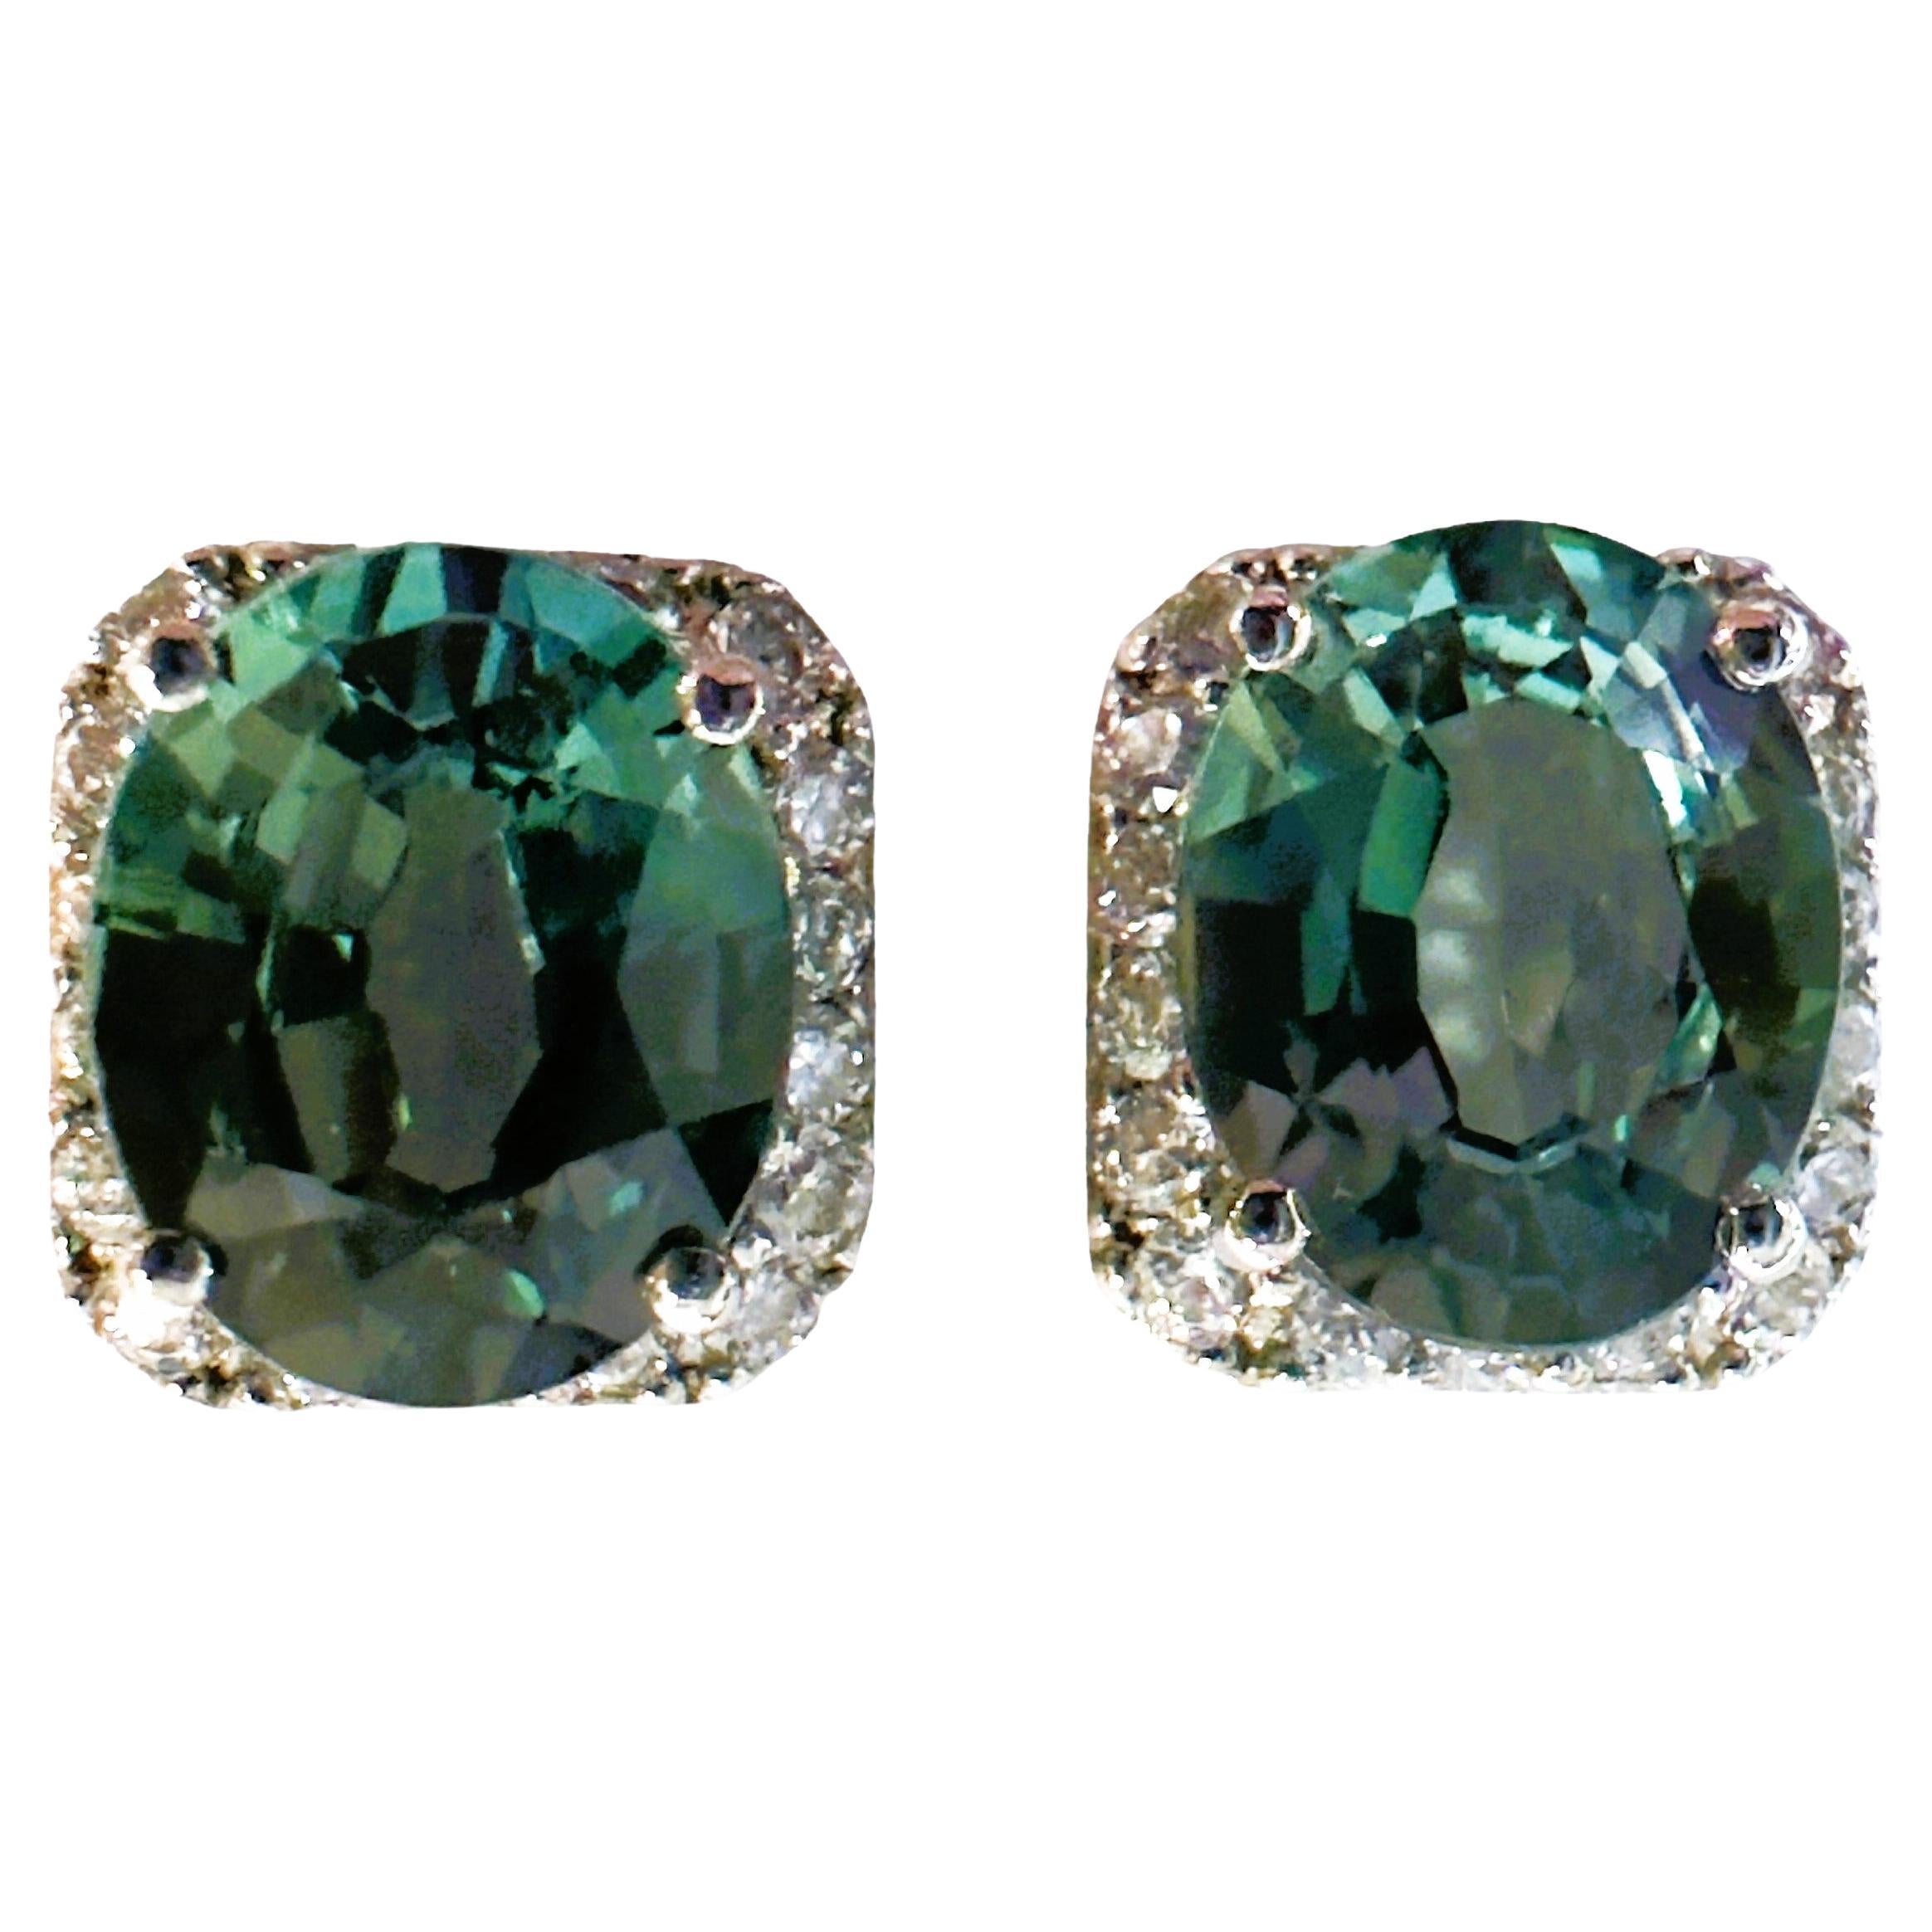 New African 4.70 ct Green & White Sapphire Post Sterling Earrings